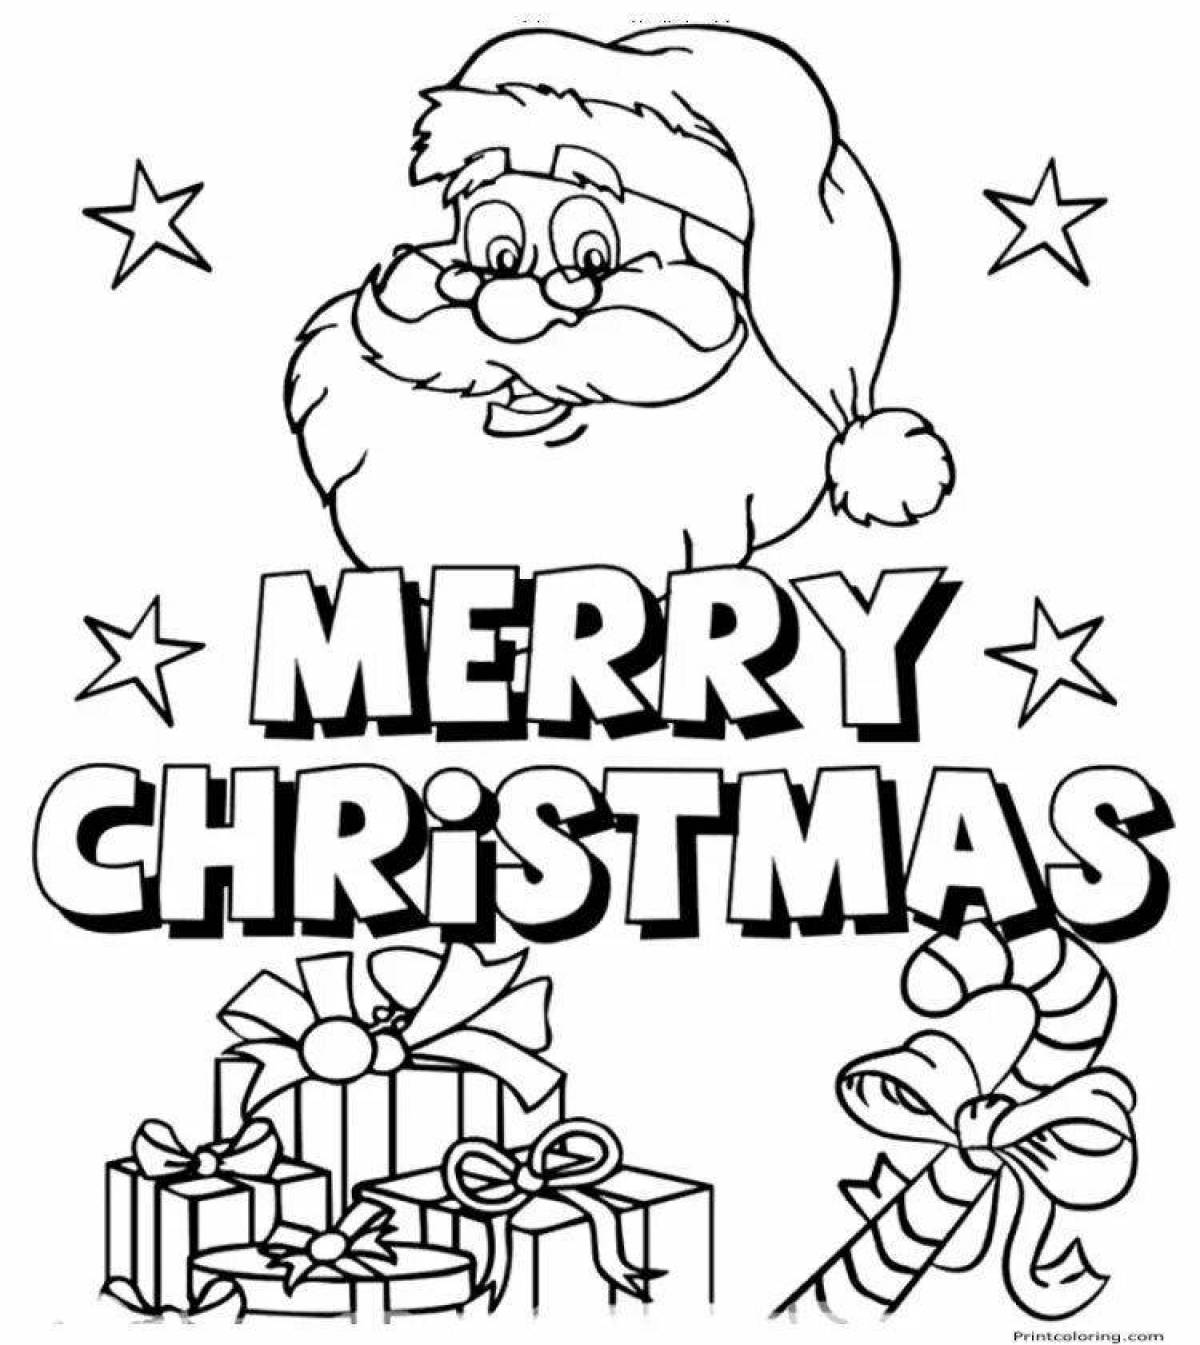 Colorful merry christmas coloring book